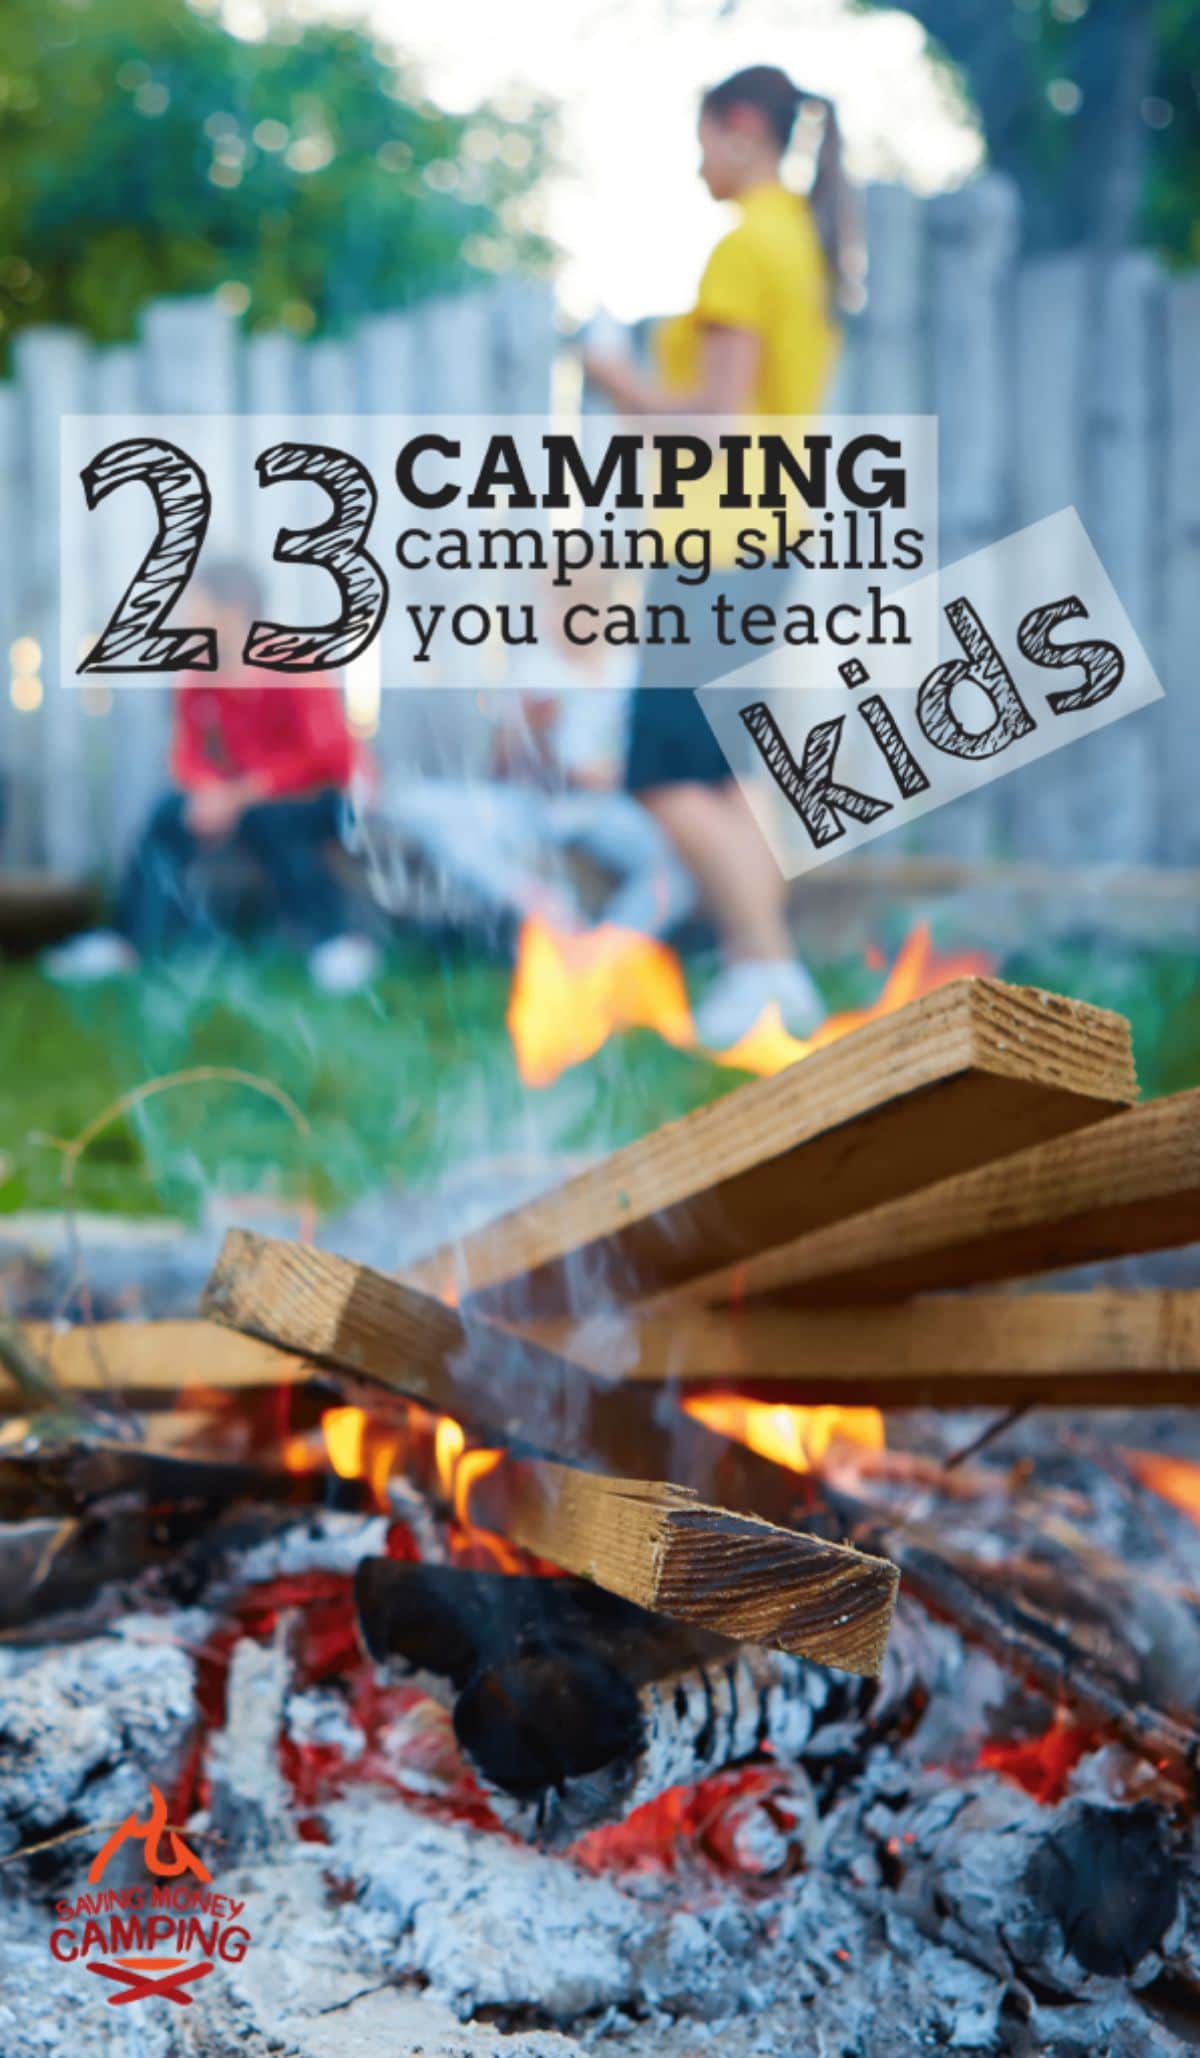 the text reads "23 camping skills you can teach kids" the image is of a campfire in the foreground and 2 children blurred in the background